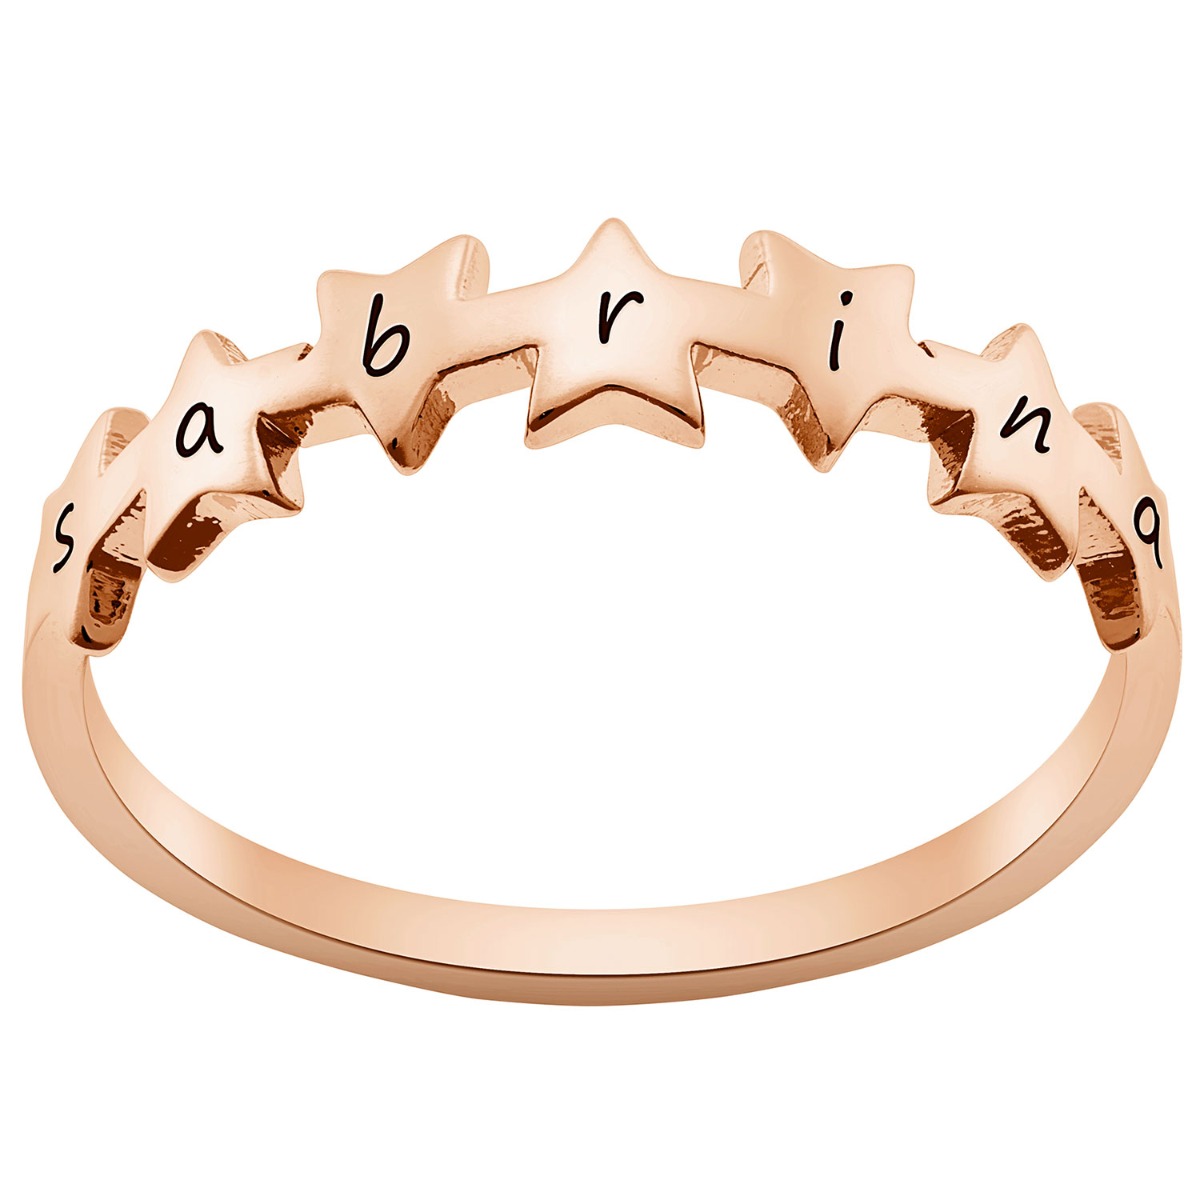 Sequence of Stars 14K Rose Gold Plated Name Ring